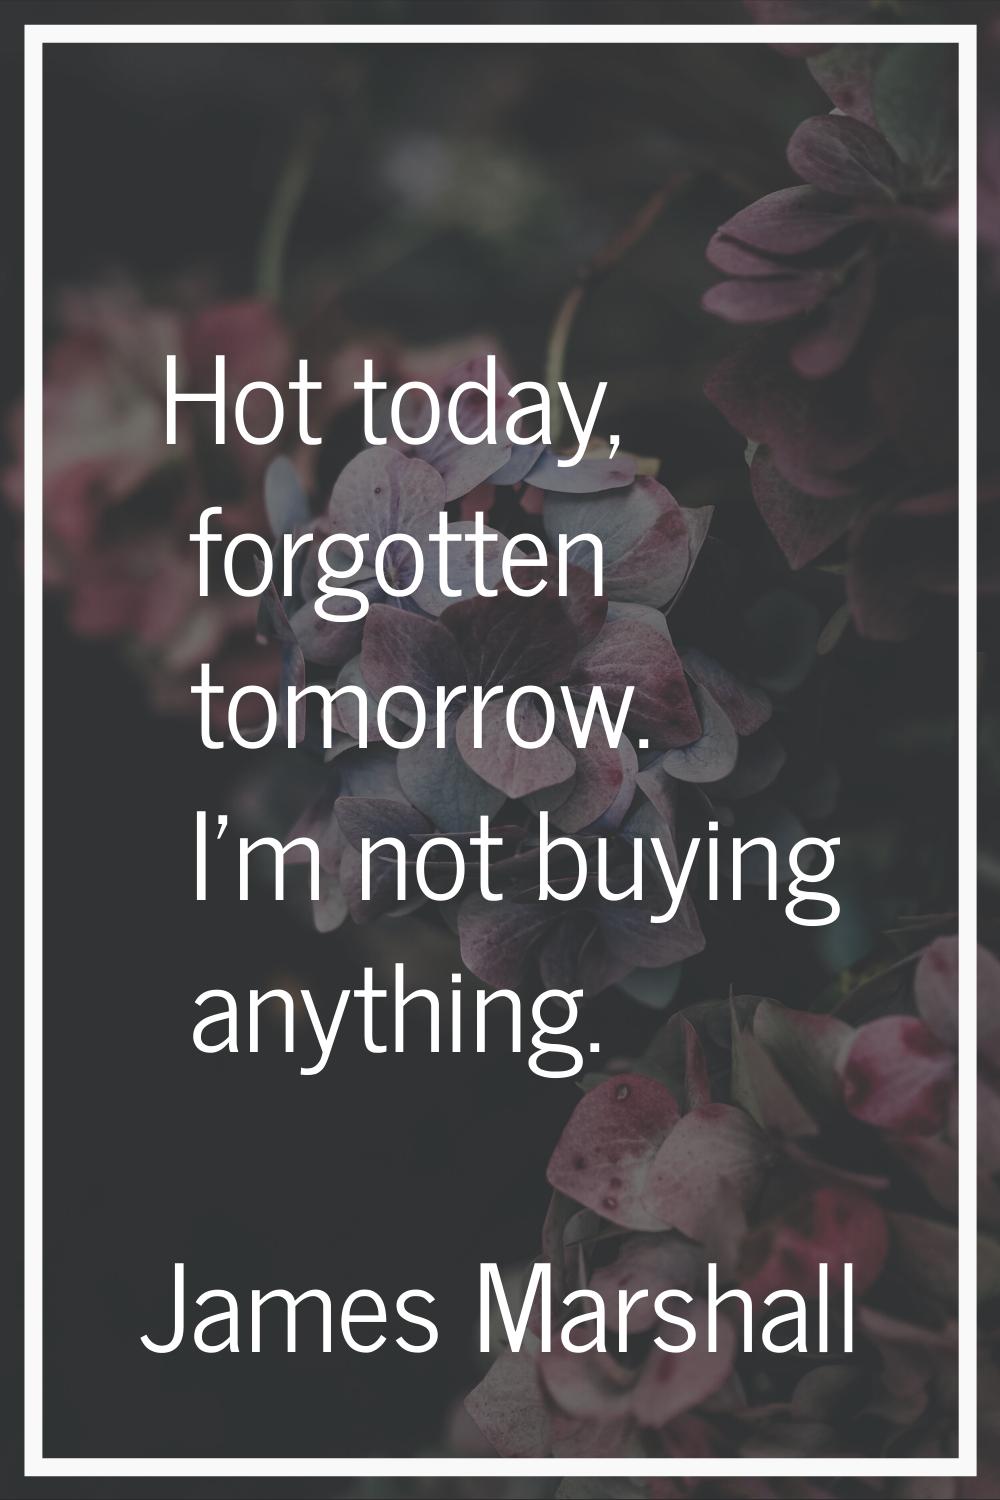 Hot today, forgotten tomorrow. I'm not buying anything.